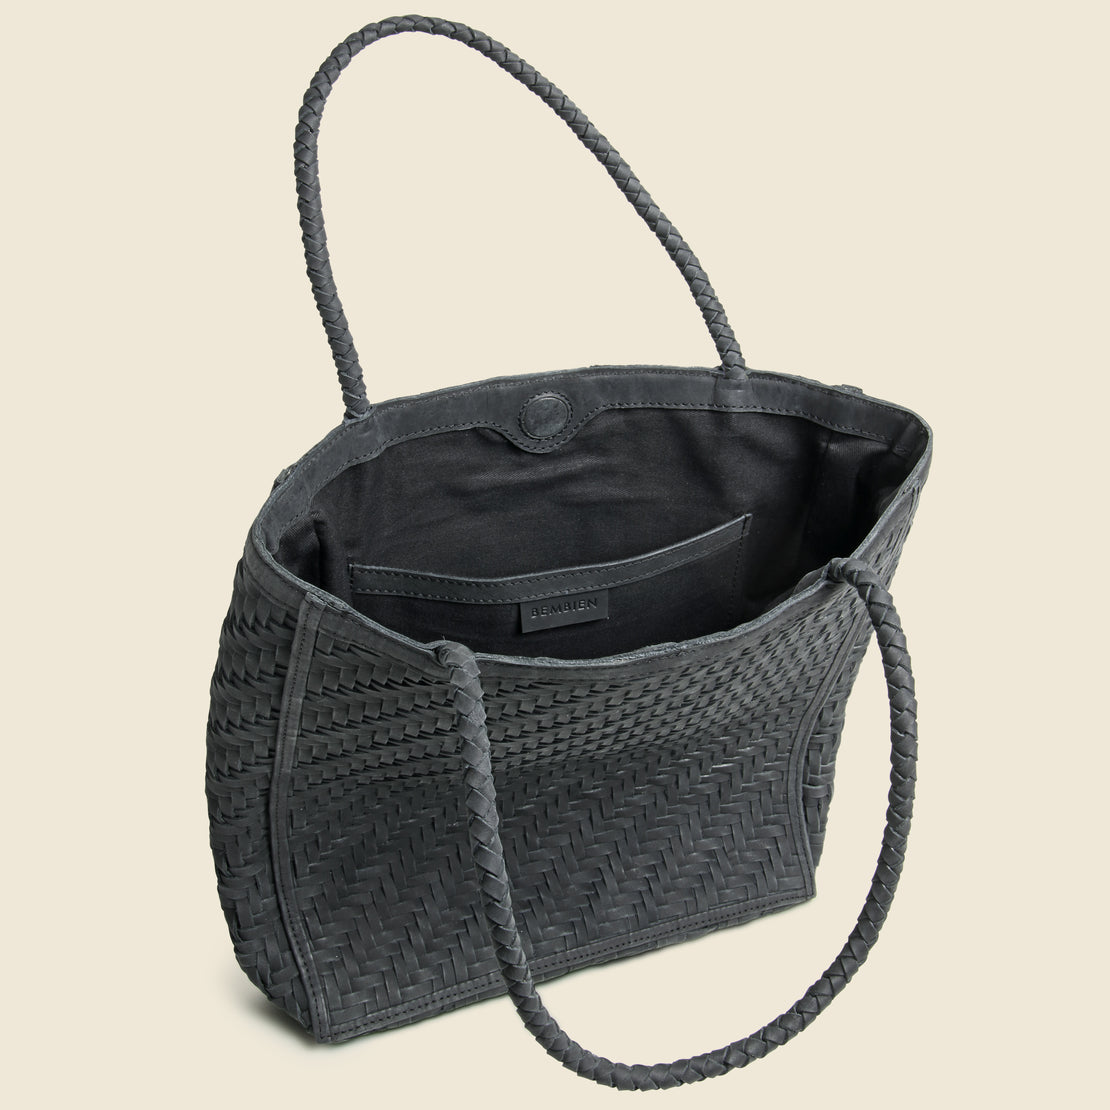 Le Tote - Black - Bembien - STAG Provisions - W - Accessories - Bag